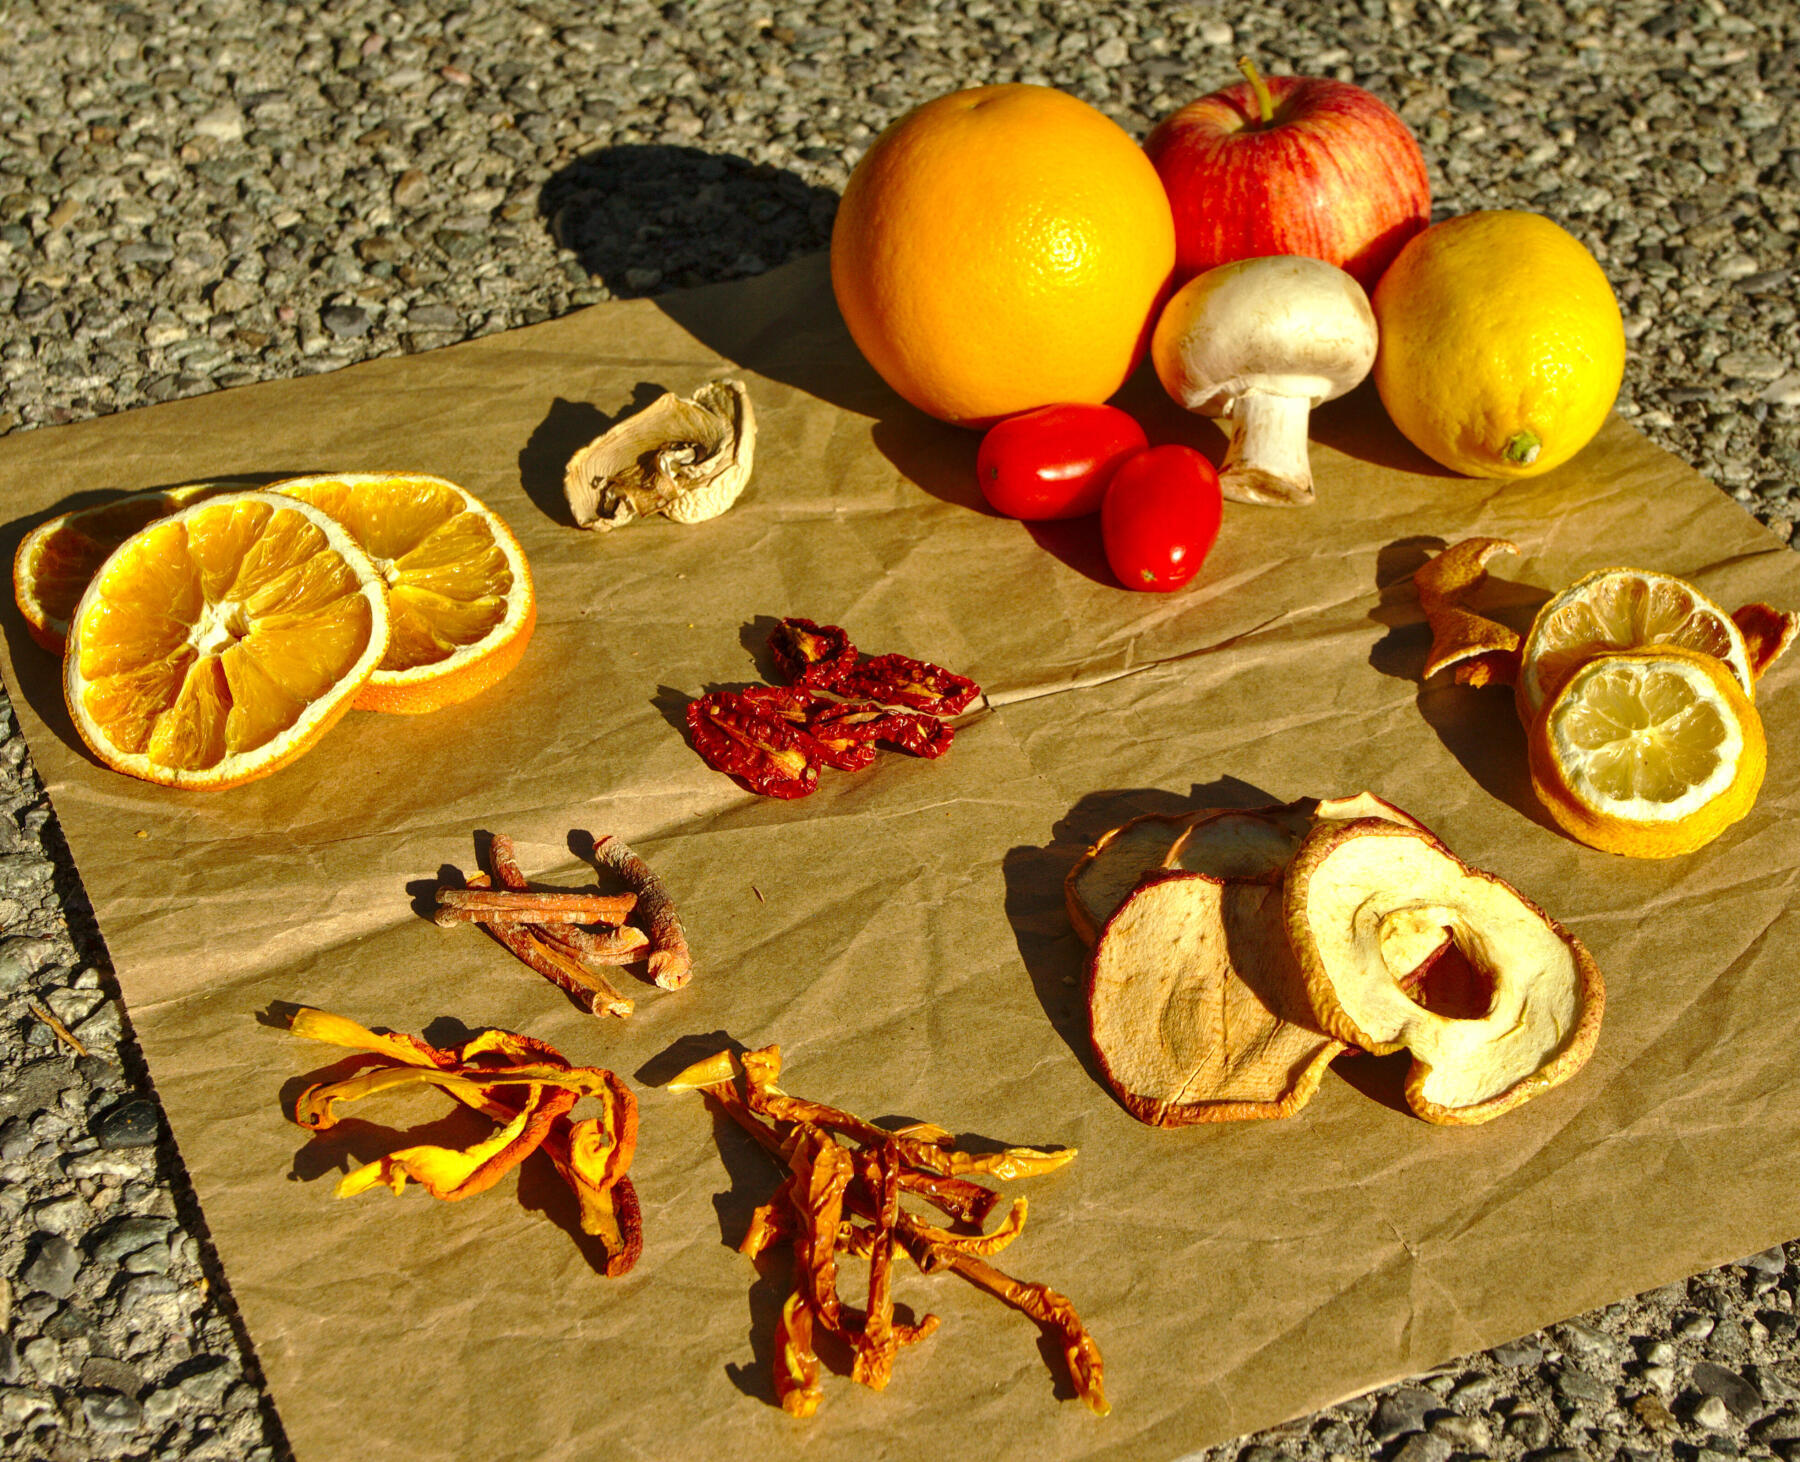 dehydrated vegetables and fruits